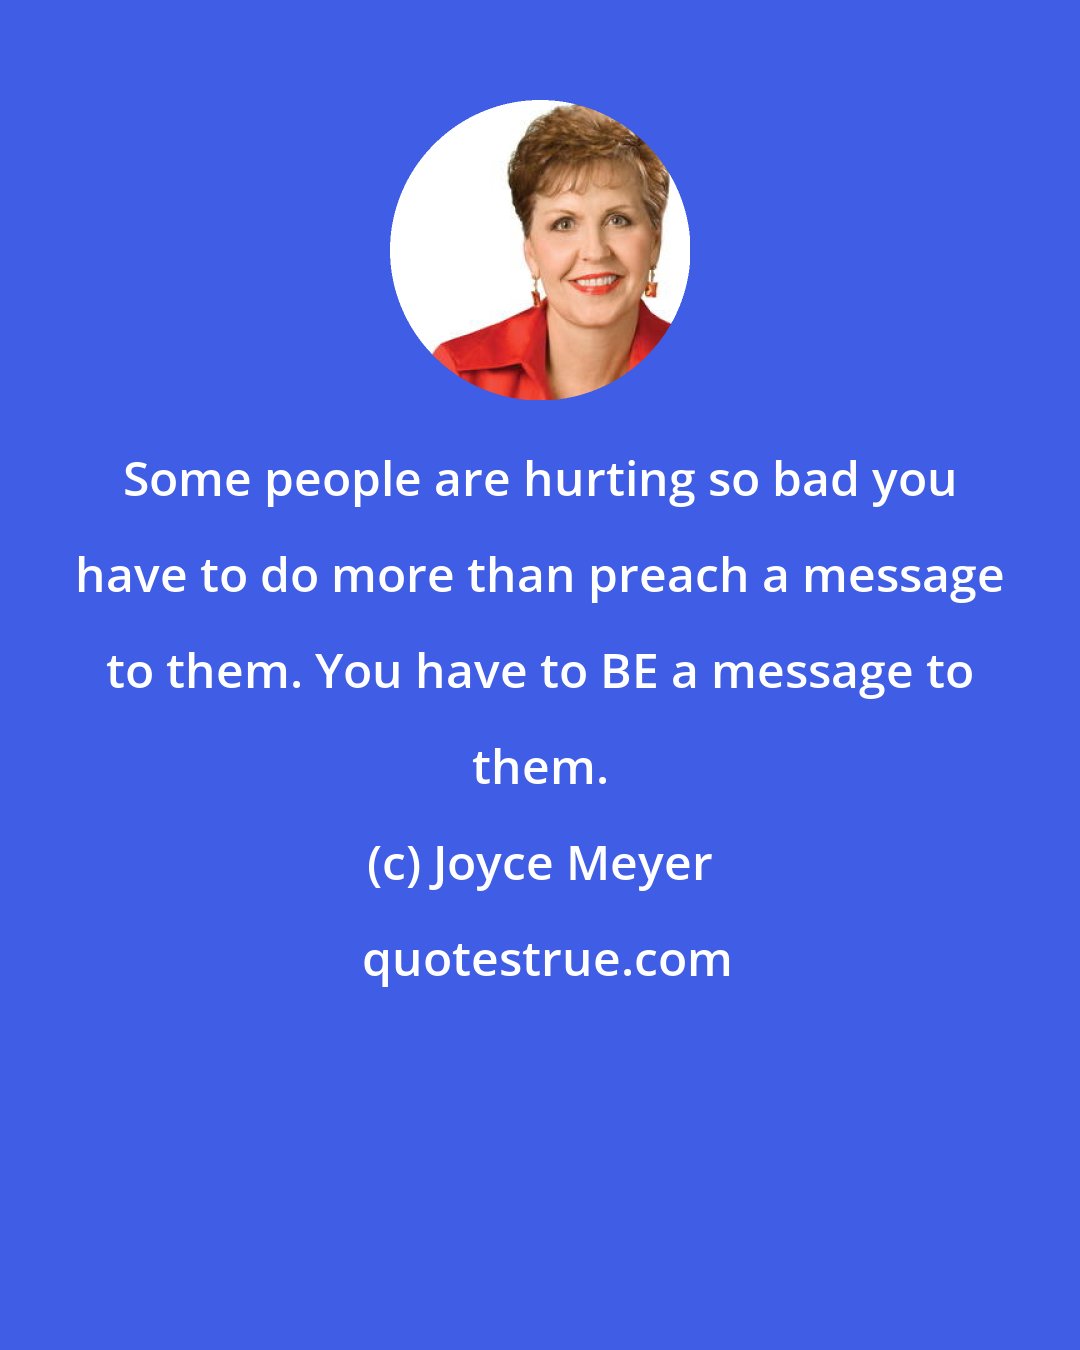 Joyce Meyer: Some people are hurting so bad you have to do more than preach a message to them. You have to BE a message to them.